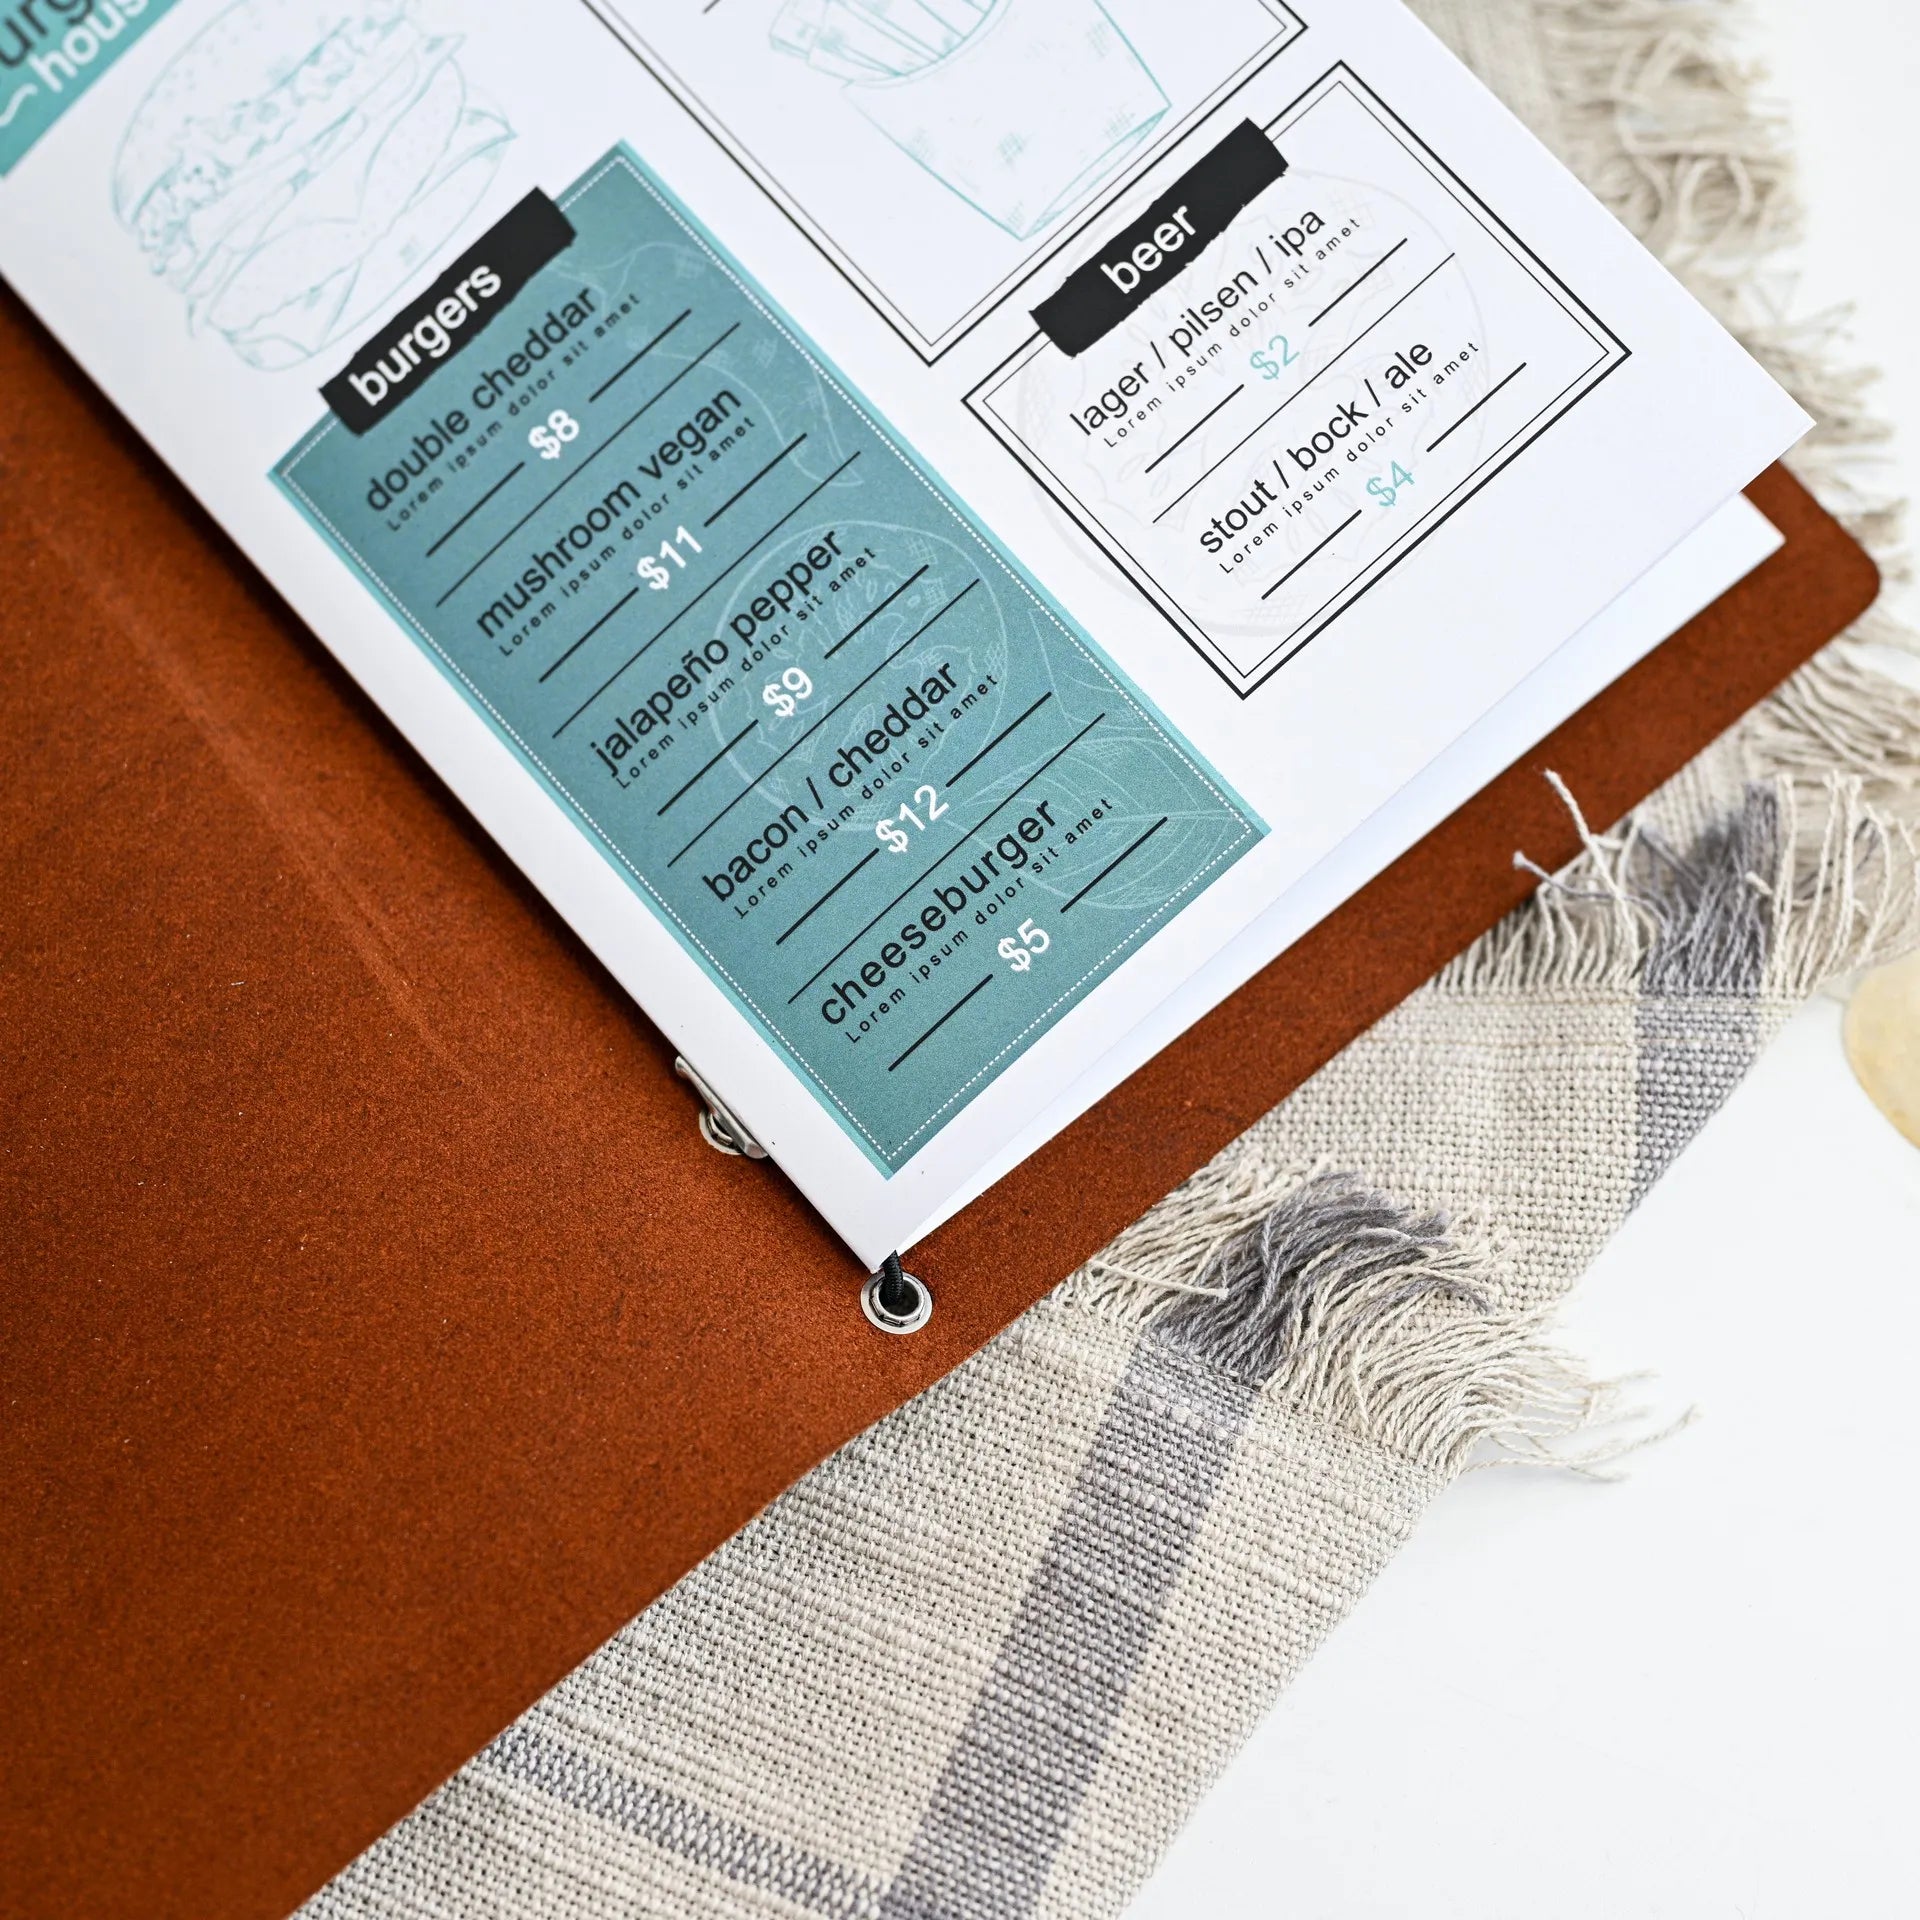 Showcase your brand with our personalized menu cover, designed to add a touch of sophistication to your menu presentation.